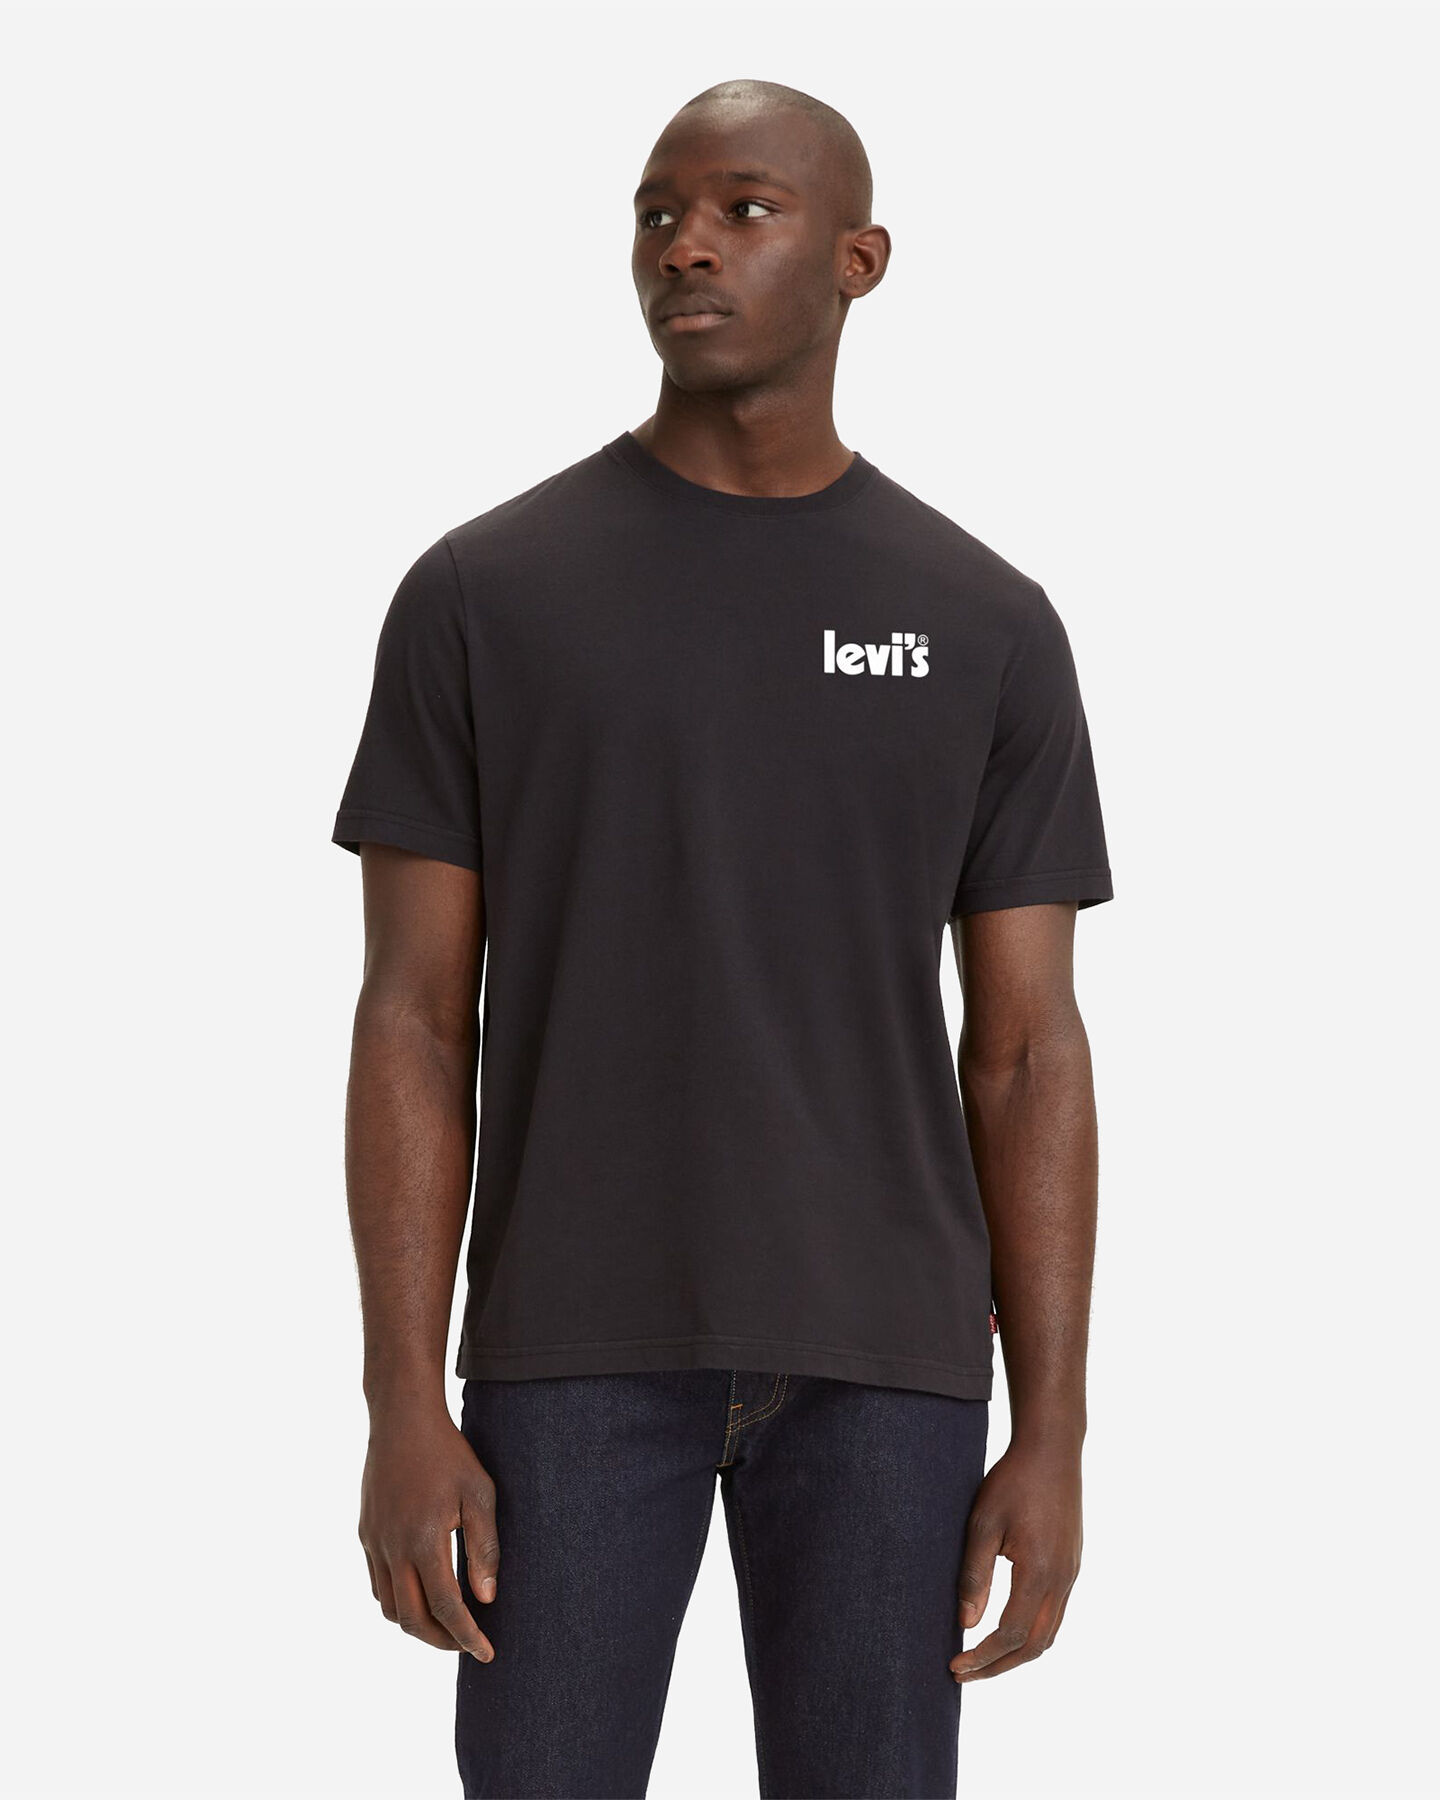  T-Shirt LEVI'S RELAXED SMALL POSTER LOGO M S4122303|0837|S scatto 0